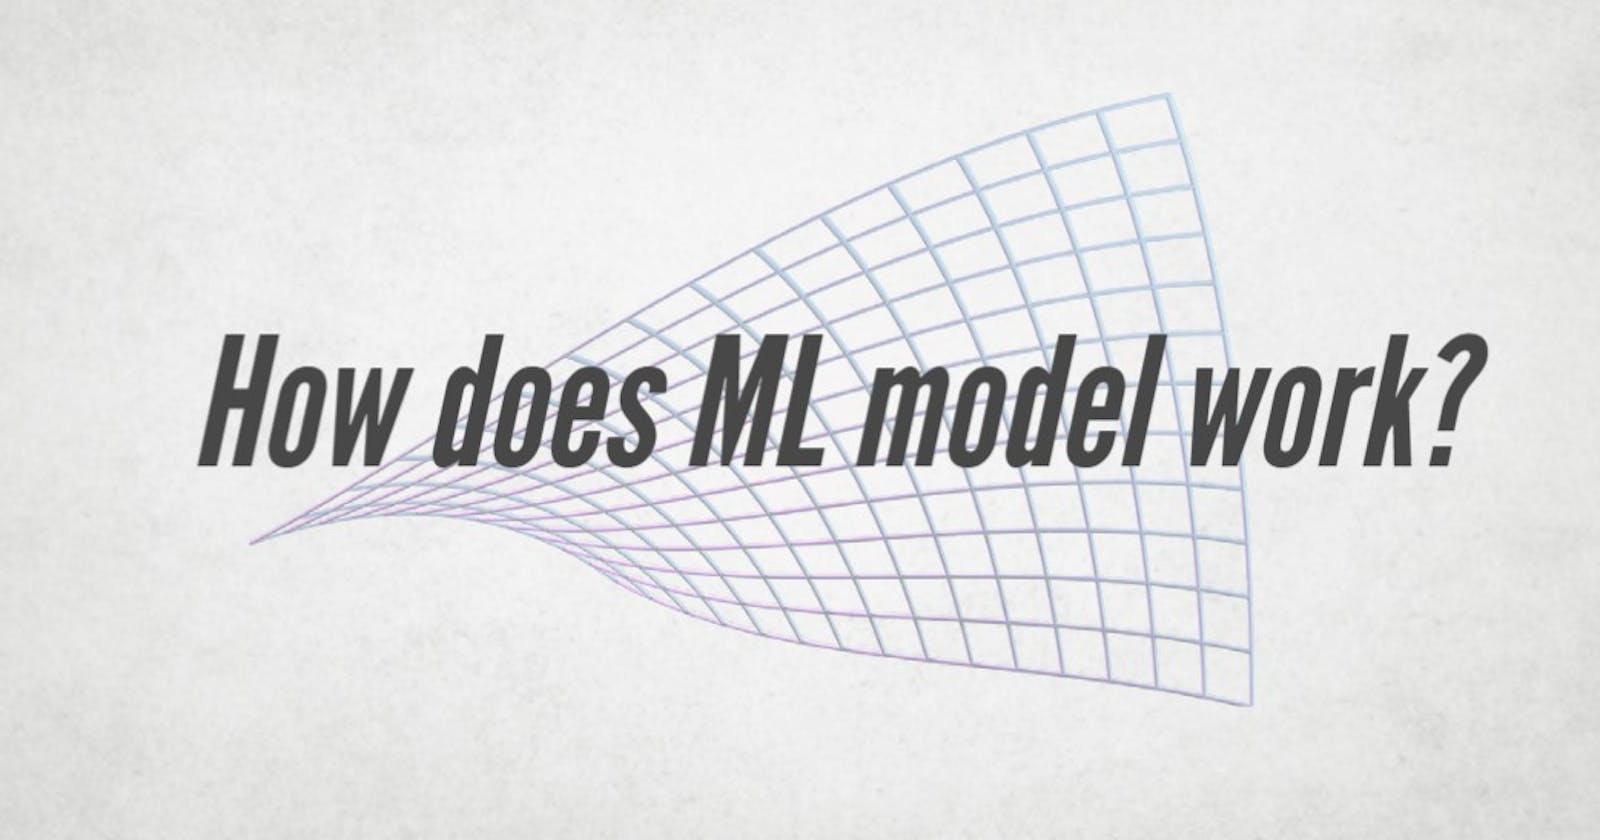 How does ML Model work?